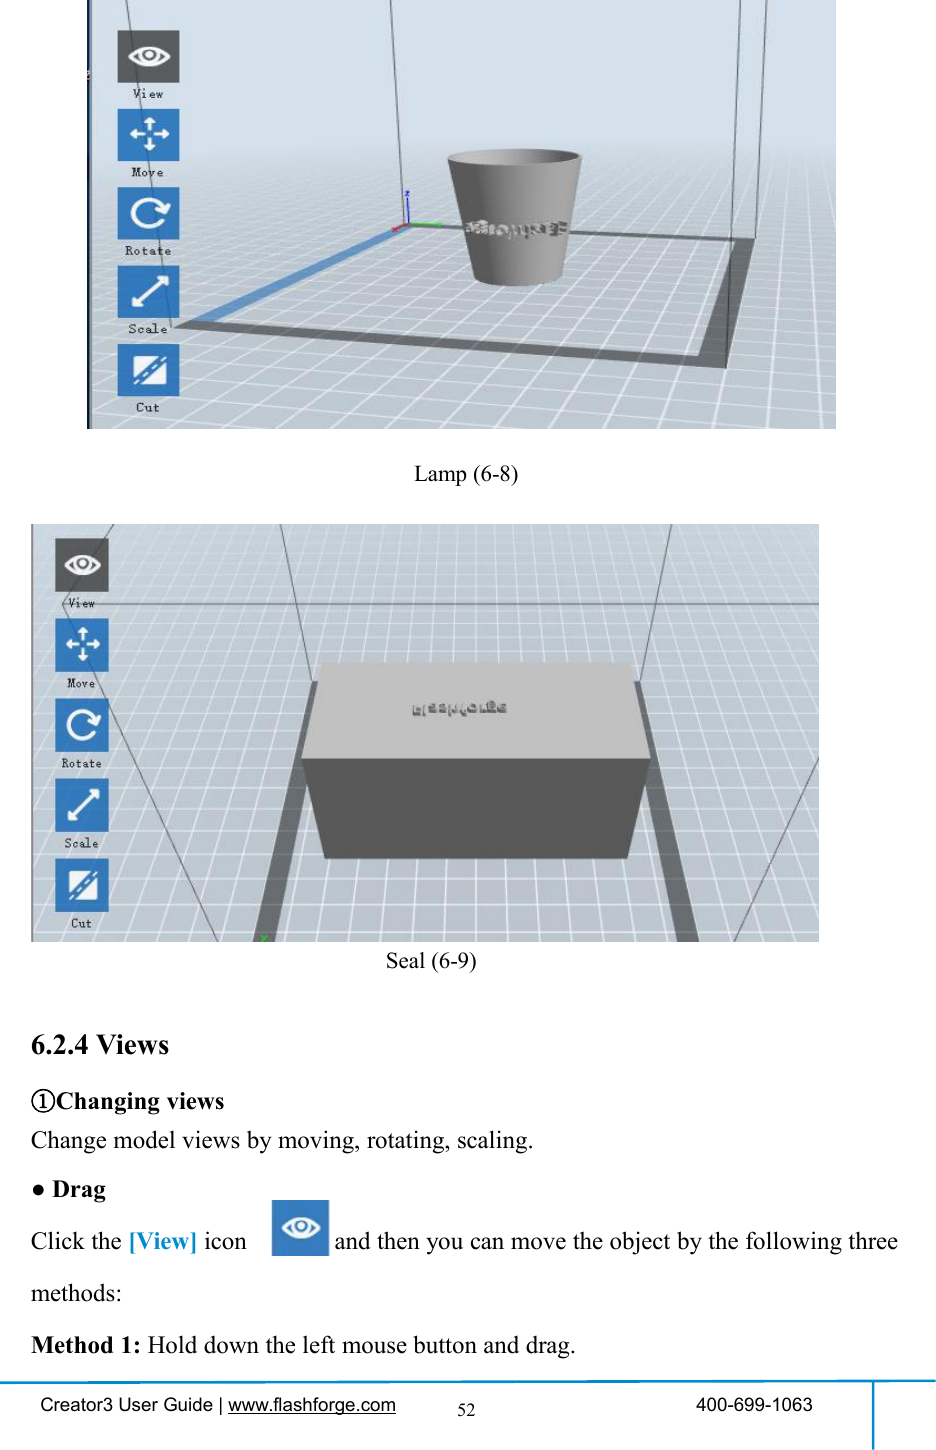 Creator3 User Guide | www.flashforge.com 400-699-106352Lamp (6-8)Seal (6-9)6.2.4 Views①Changing viewsChange model views by moving, rotating, scaling.●DragClick the [View] icon and then you can move the object by the following threemethods:Method 1: Hold down the left mouse button and drag.